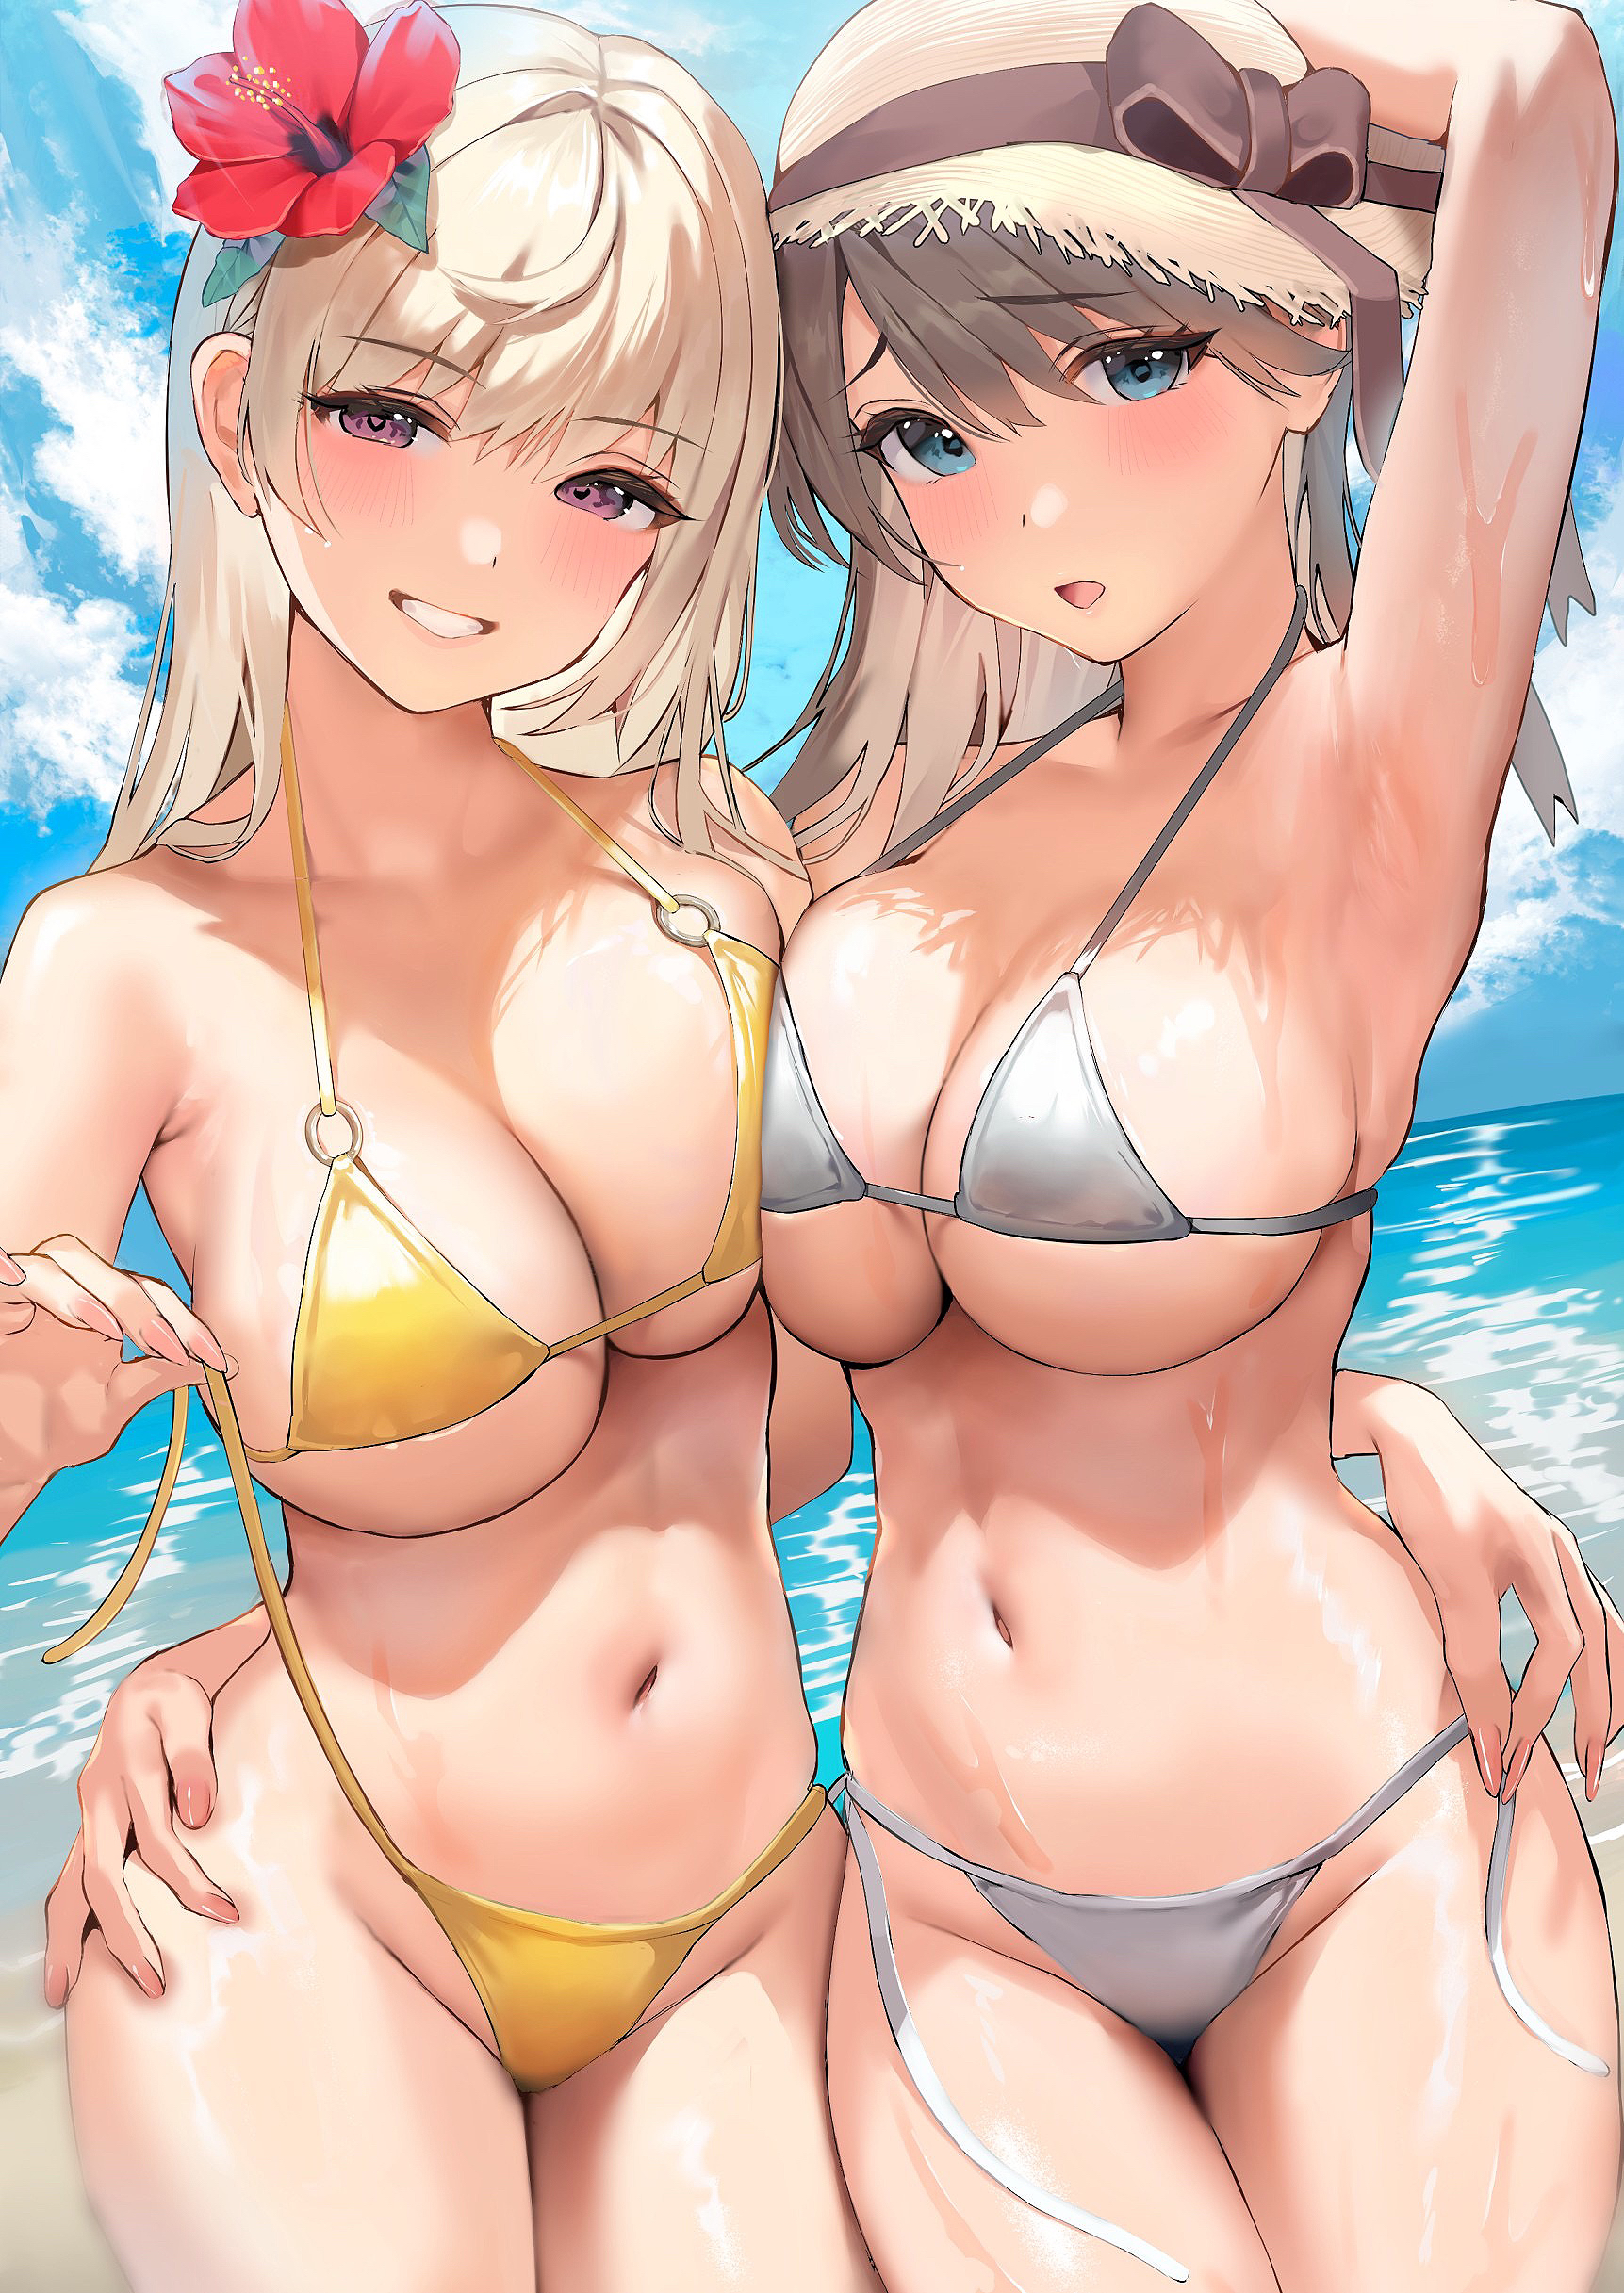 Anime 1723x2433 anime girls portrait display two women swimwear bikini looking at viewer yellow bikini gray bikini boobs on boobs flowers big boobs undressing cleavage one arm up armpits hibiscus open mouth smiling sun hats straw hat hat belly button Inushima belly blonde long hair blue eyes brown eyes brunette flower in hair wet body hands on ass water clouds sky hands on hips